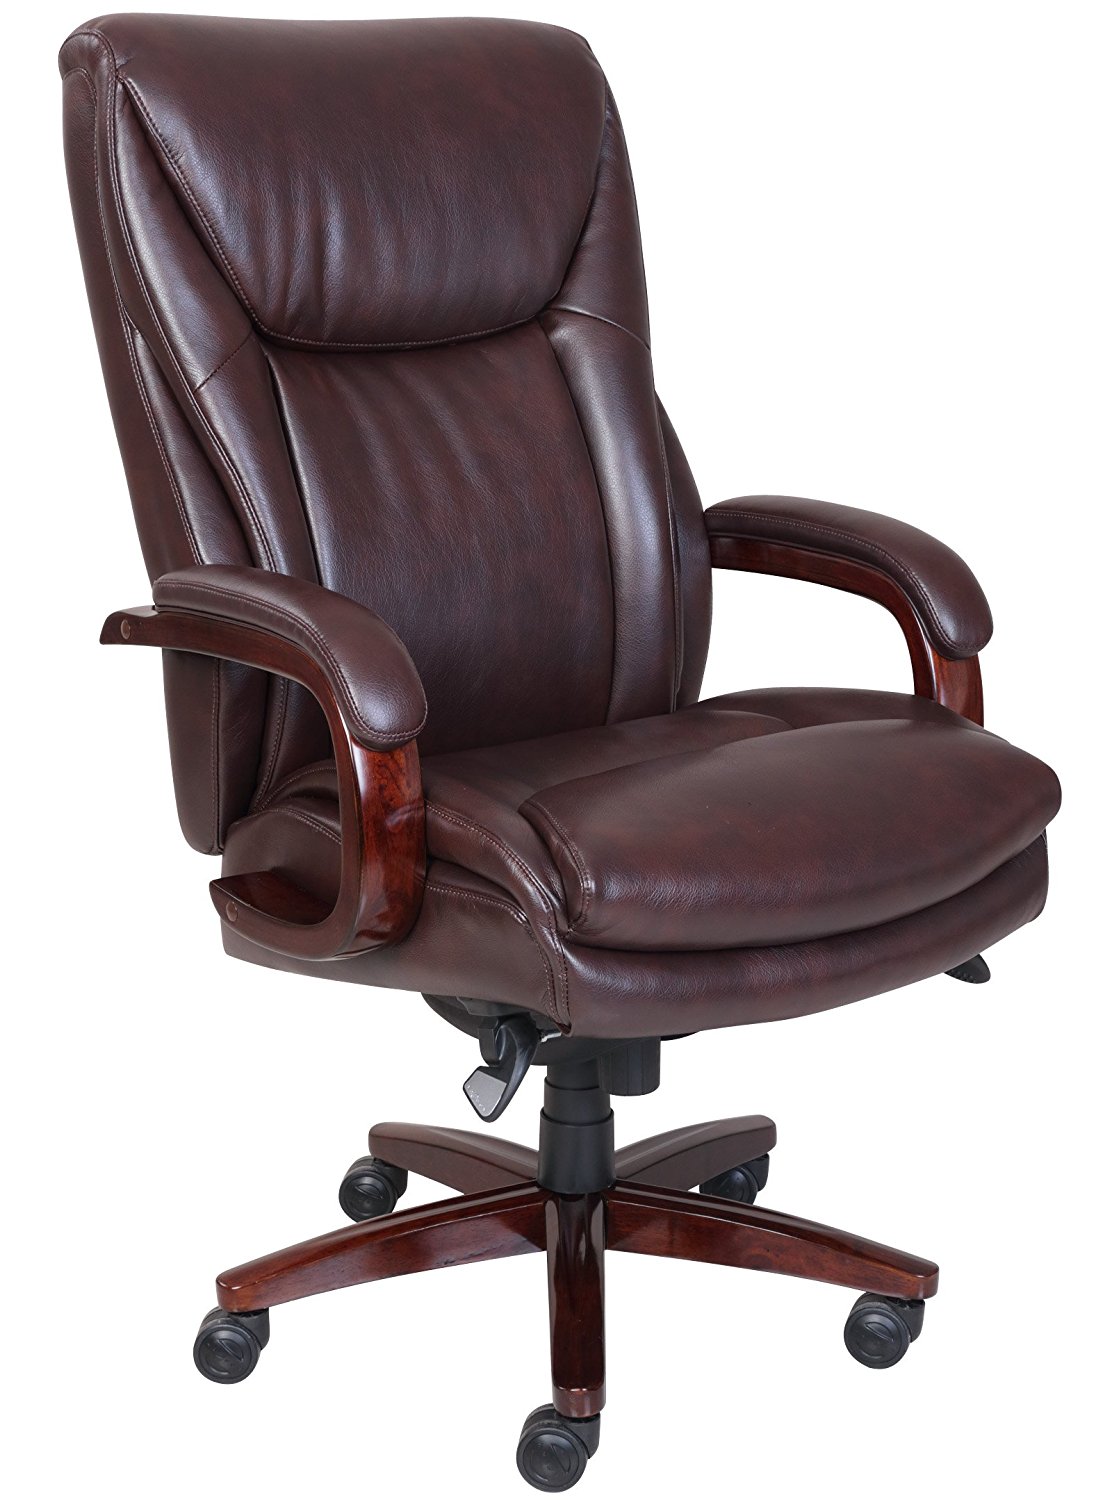 Leather Executive Desk Chair Brown Leather Desk Chair / Brown Pu ...